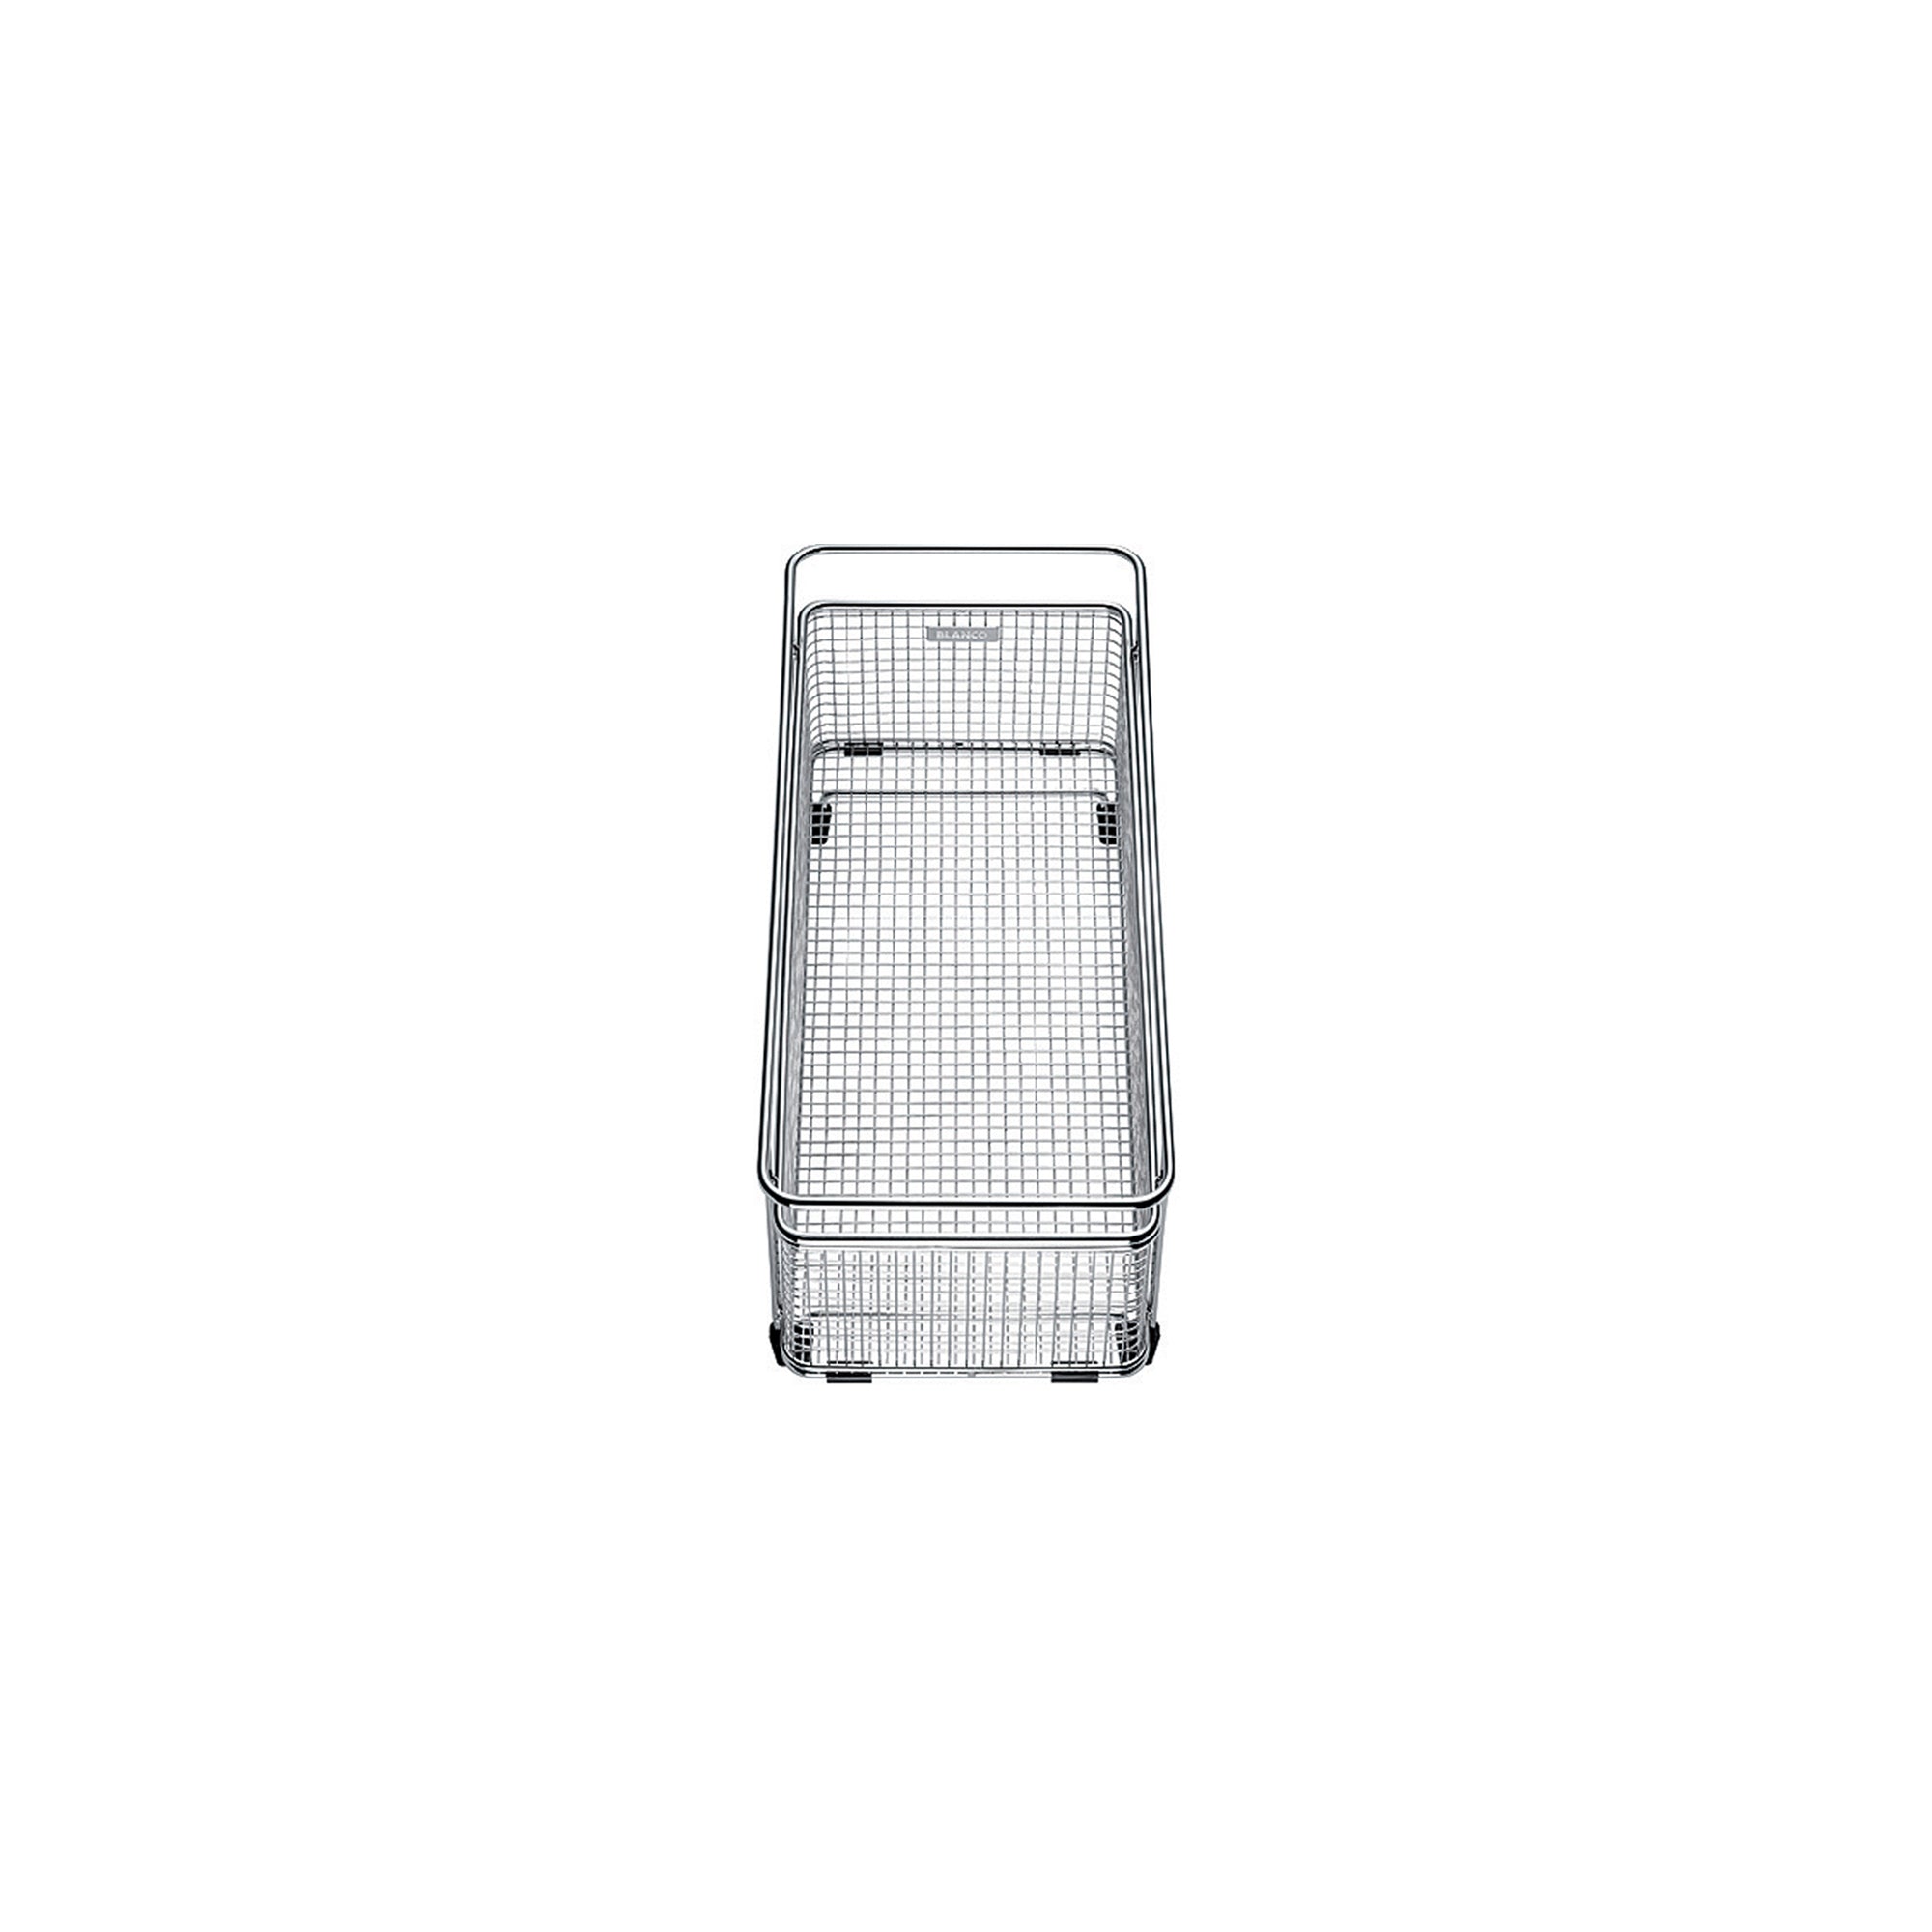 Blanco 406399- Mesh Basket, Stainless Steel, Precis with Drainboard - FaucetExpress.ca